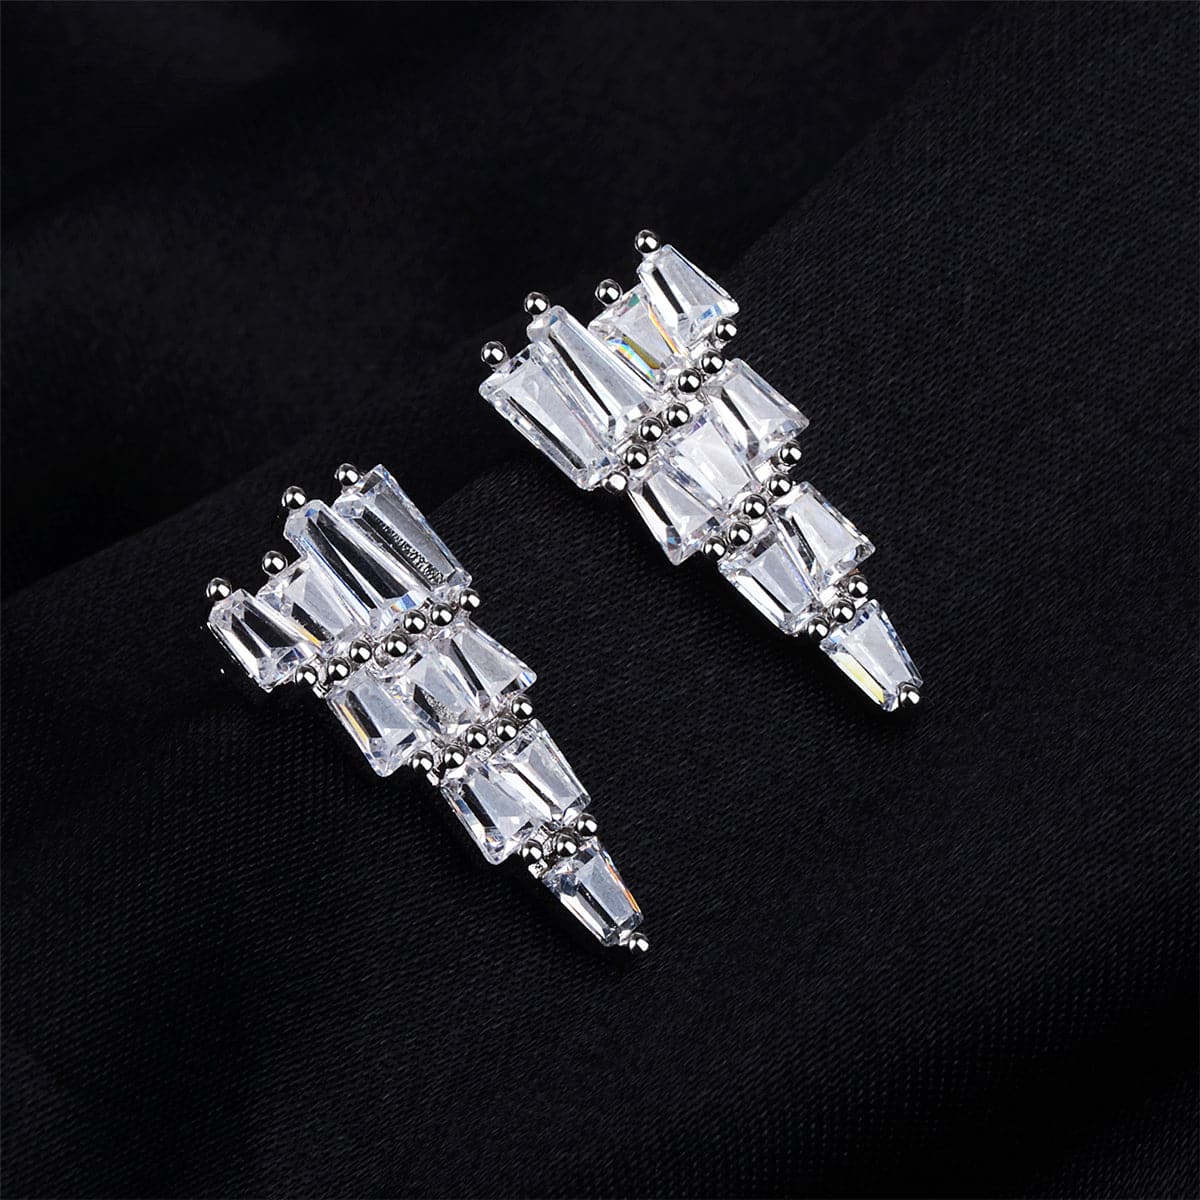 Cubic Zirconia & Silver-Plated Stacked Triangle Stud Earrings